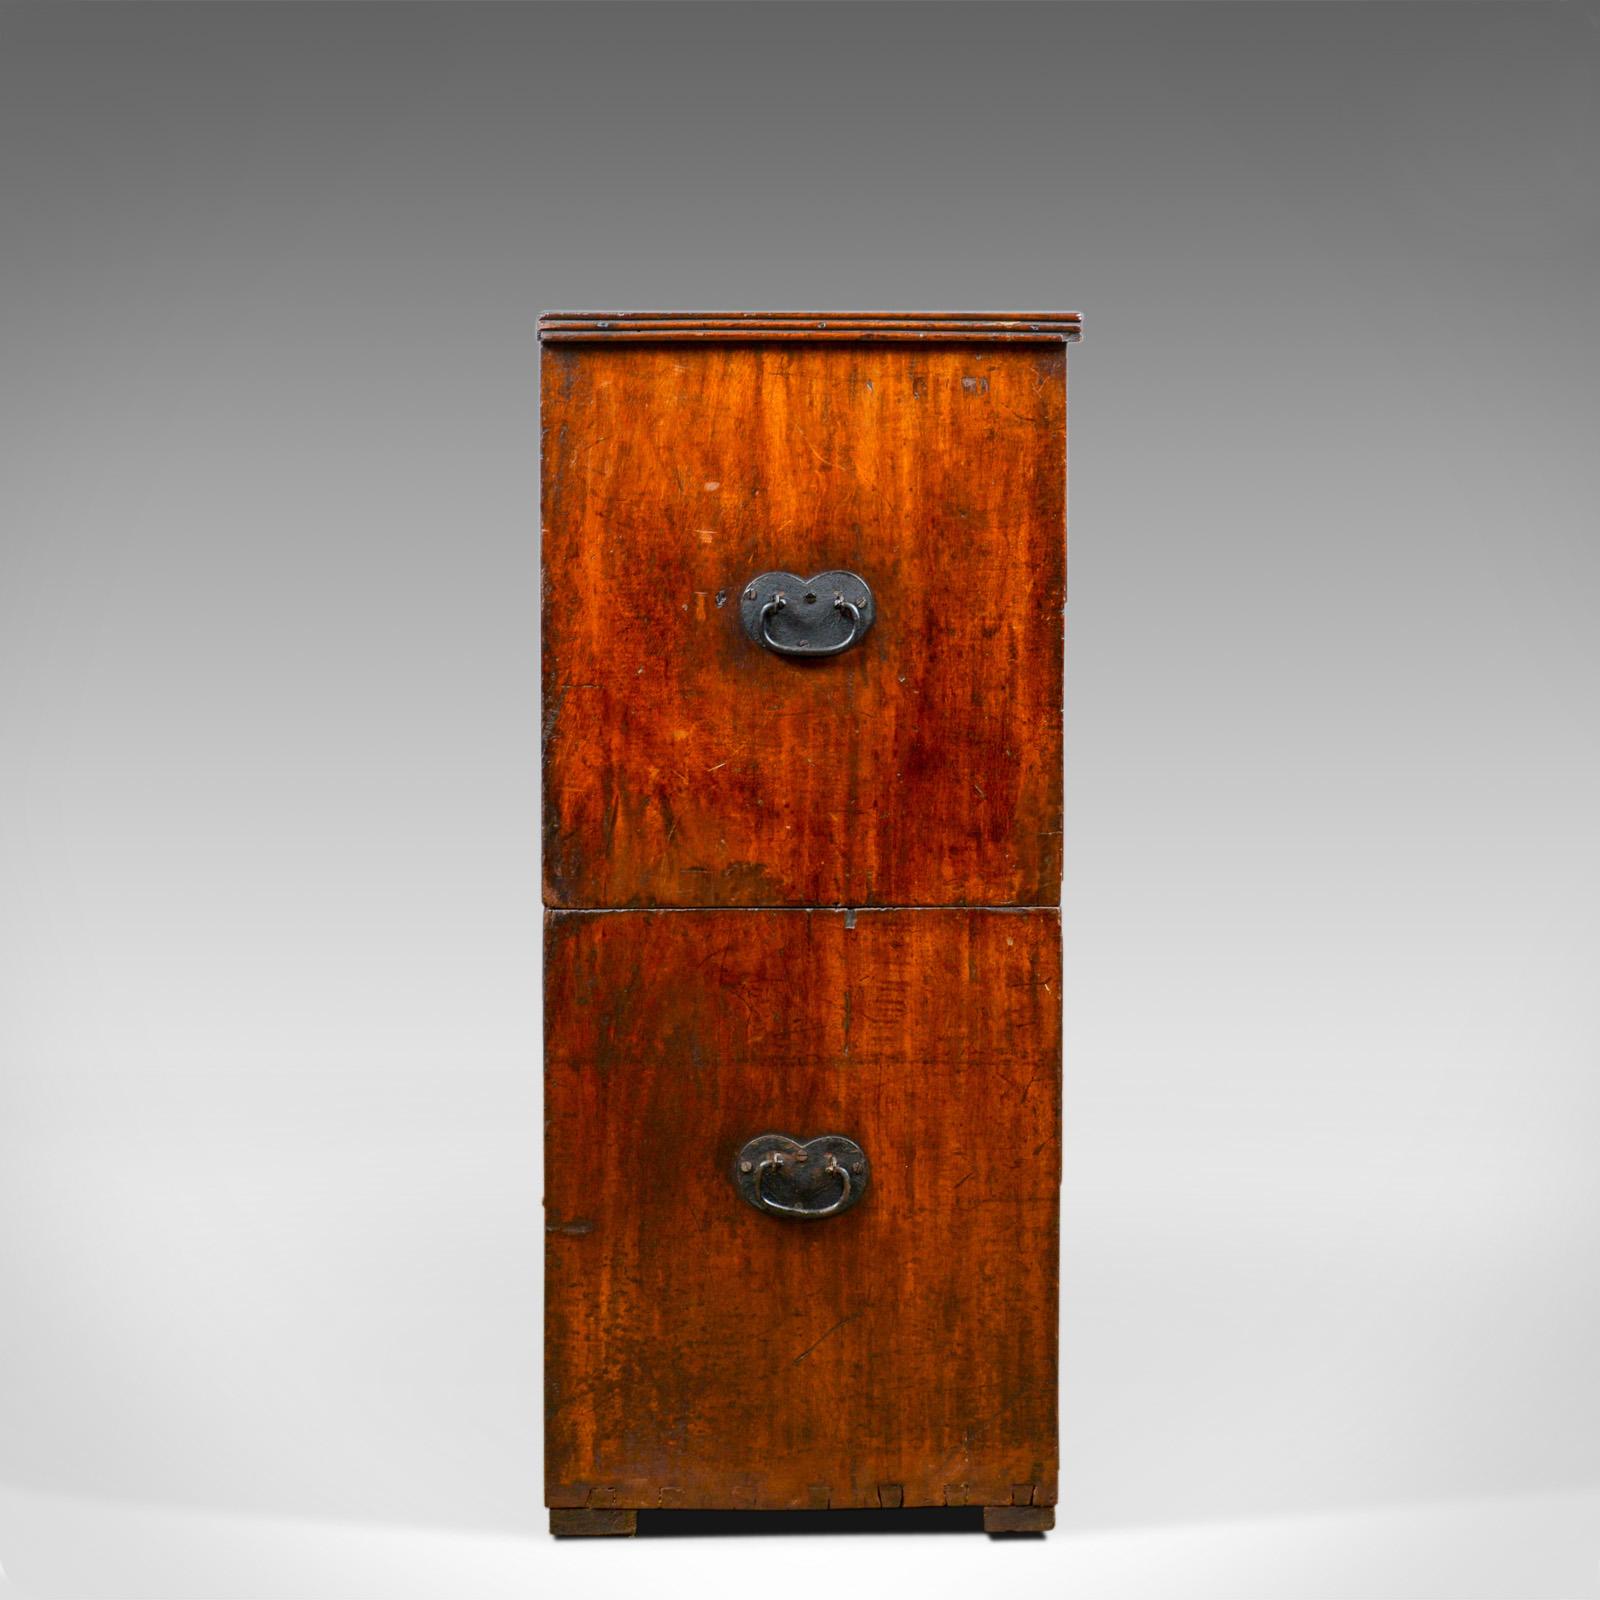 Antique Campaign Chest of Drawers, English, Late Georgian, Walnut, circa 1780 (Englisch)